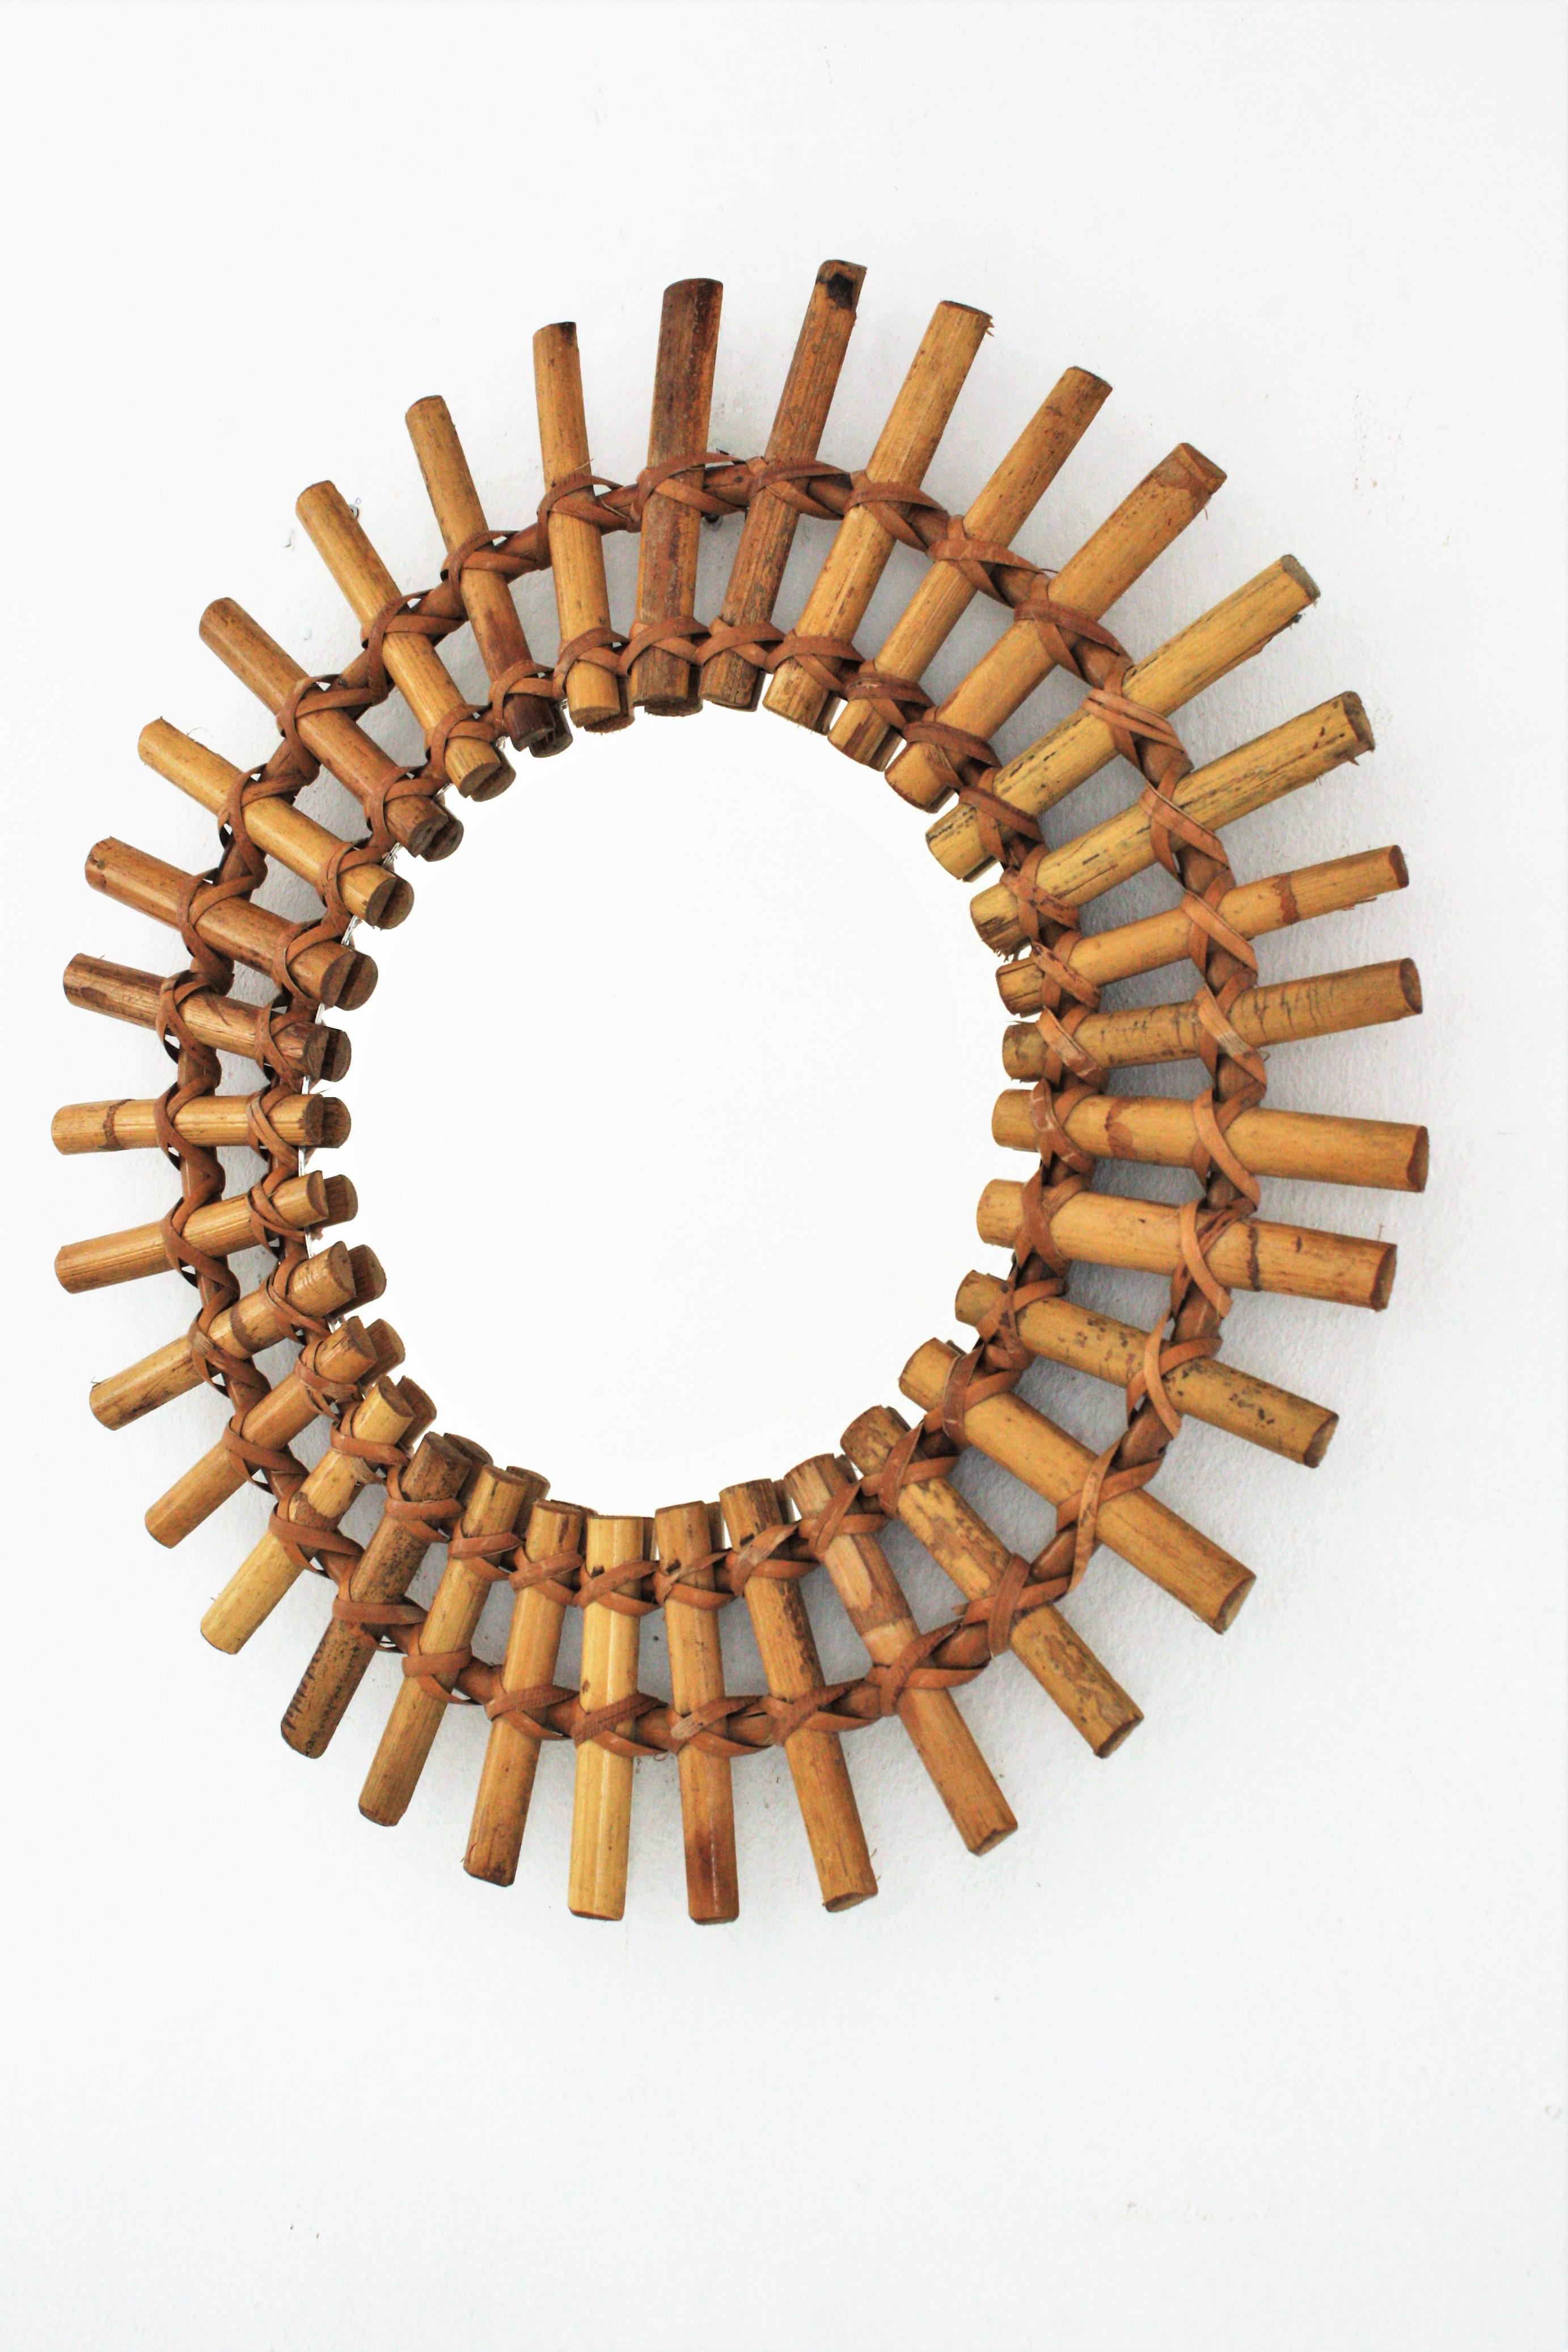 Sunburst Mirror in Rattan and Bamboo, France, 1950s For Sale 3